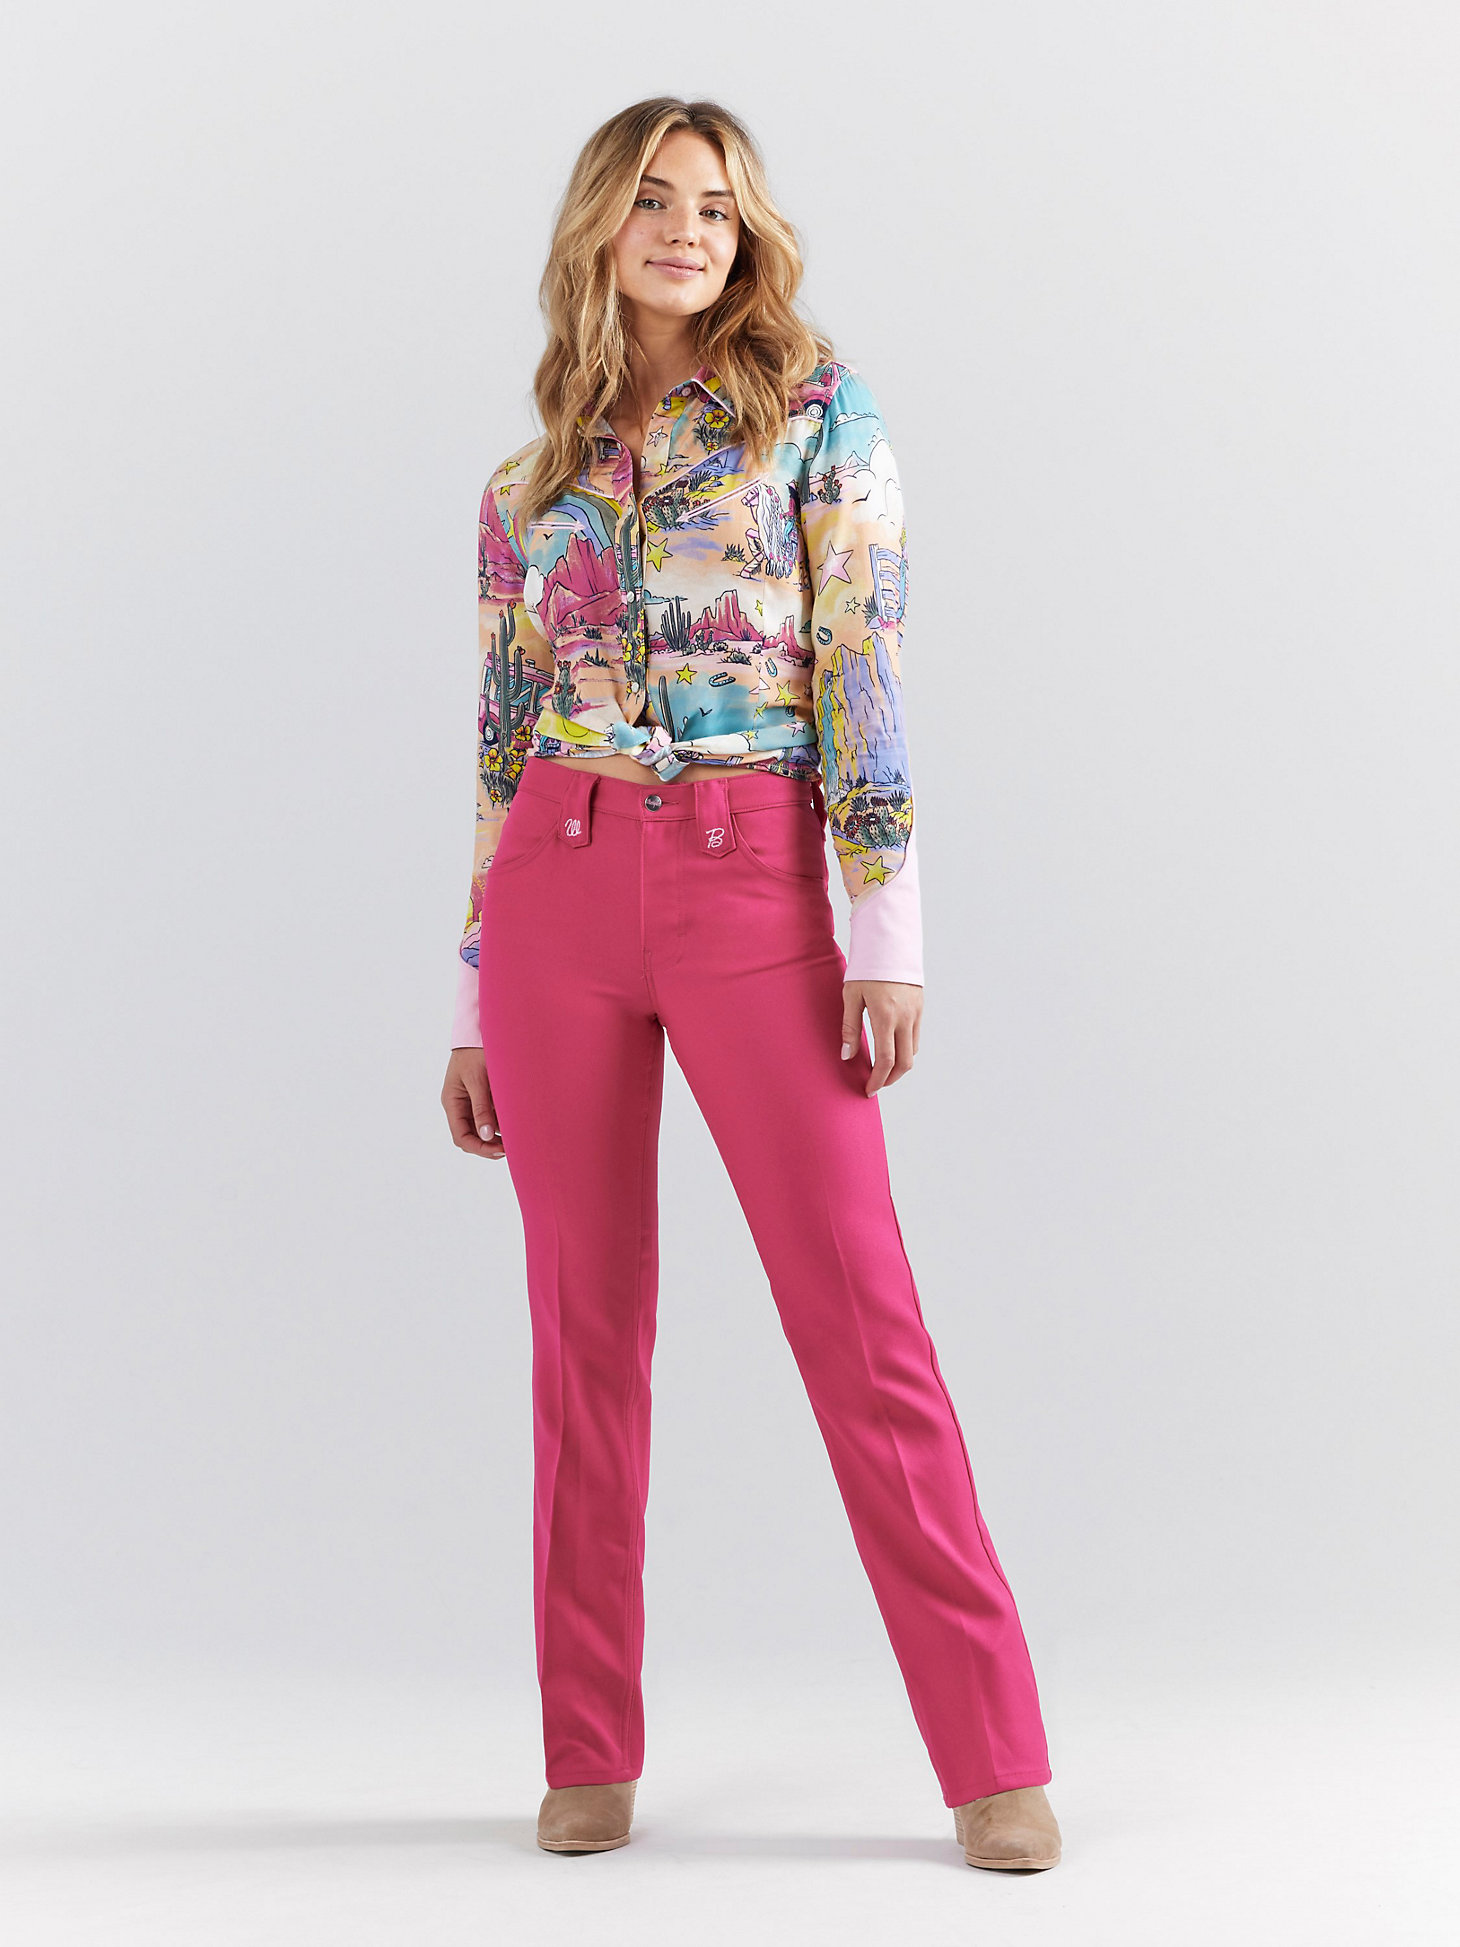 Wrangler x Barbie™ High Rise Wrancher Pant in Barbie Pink alternative view 3